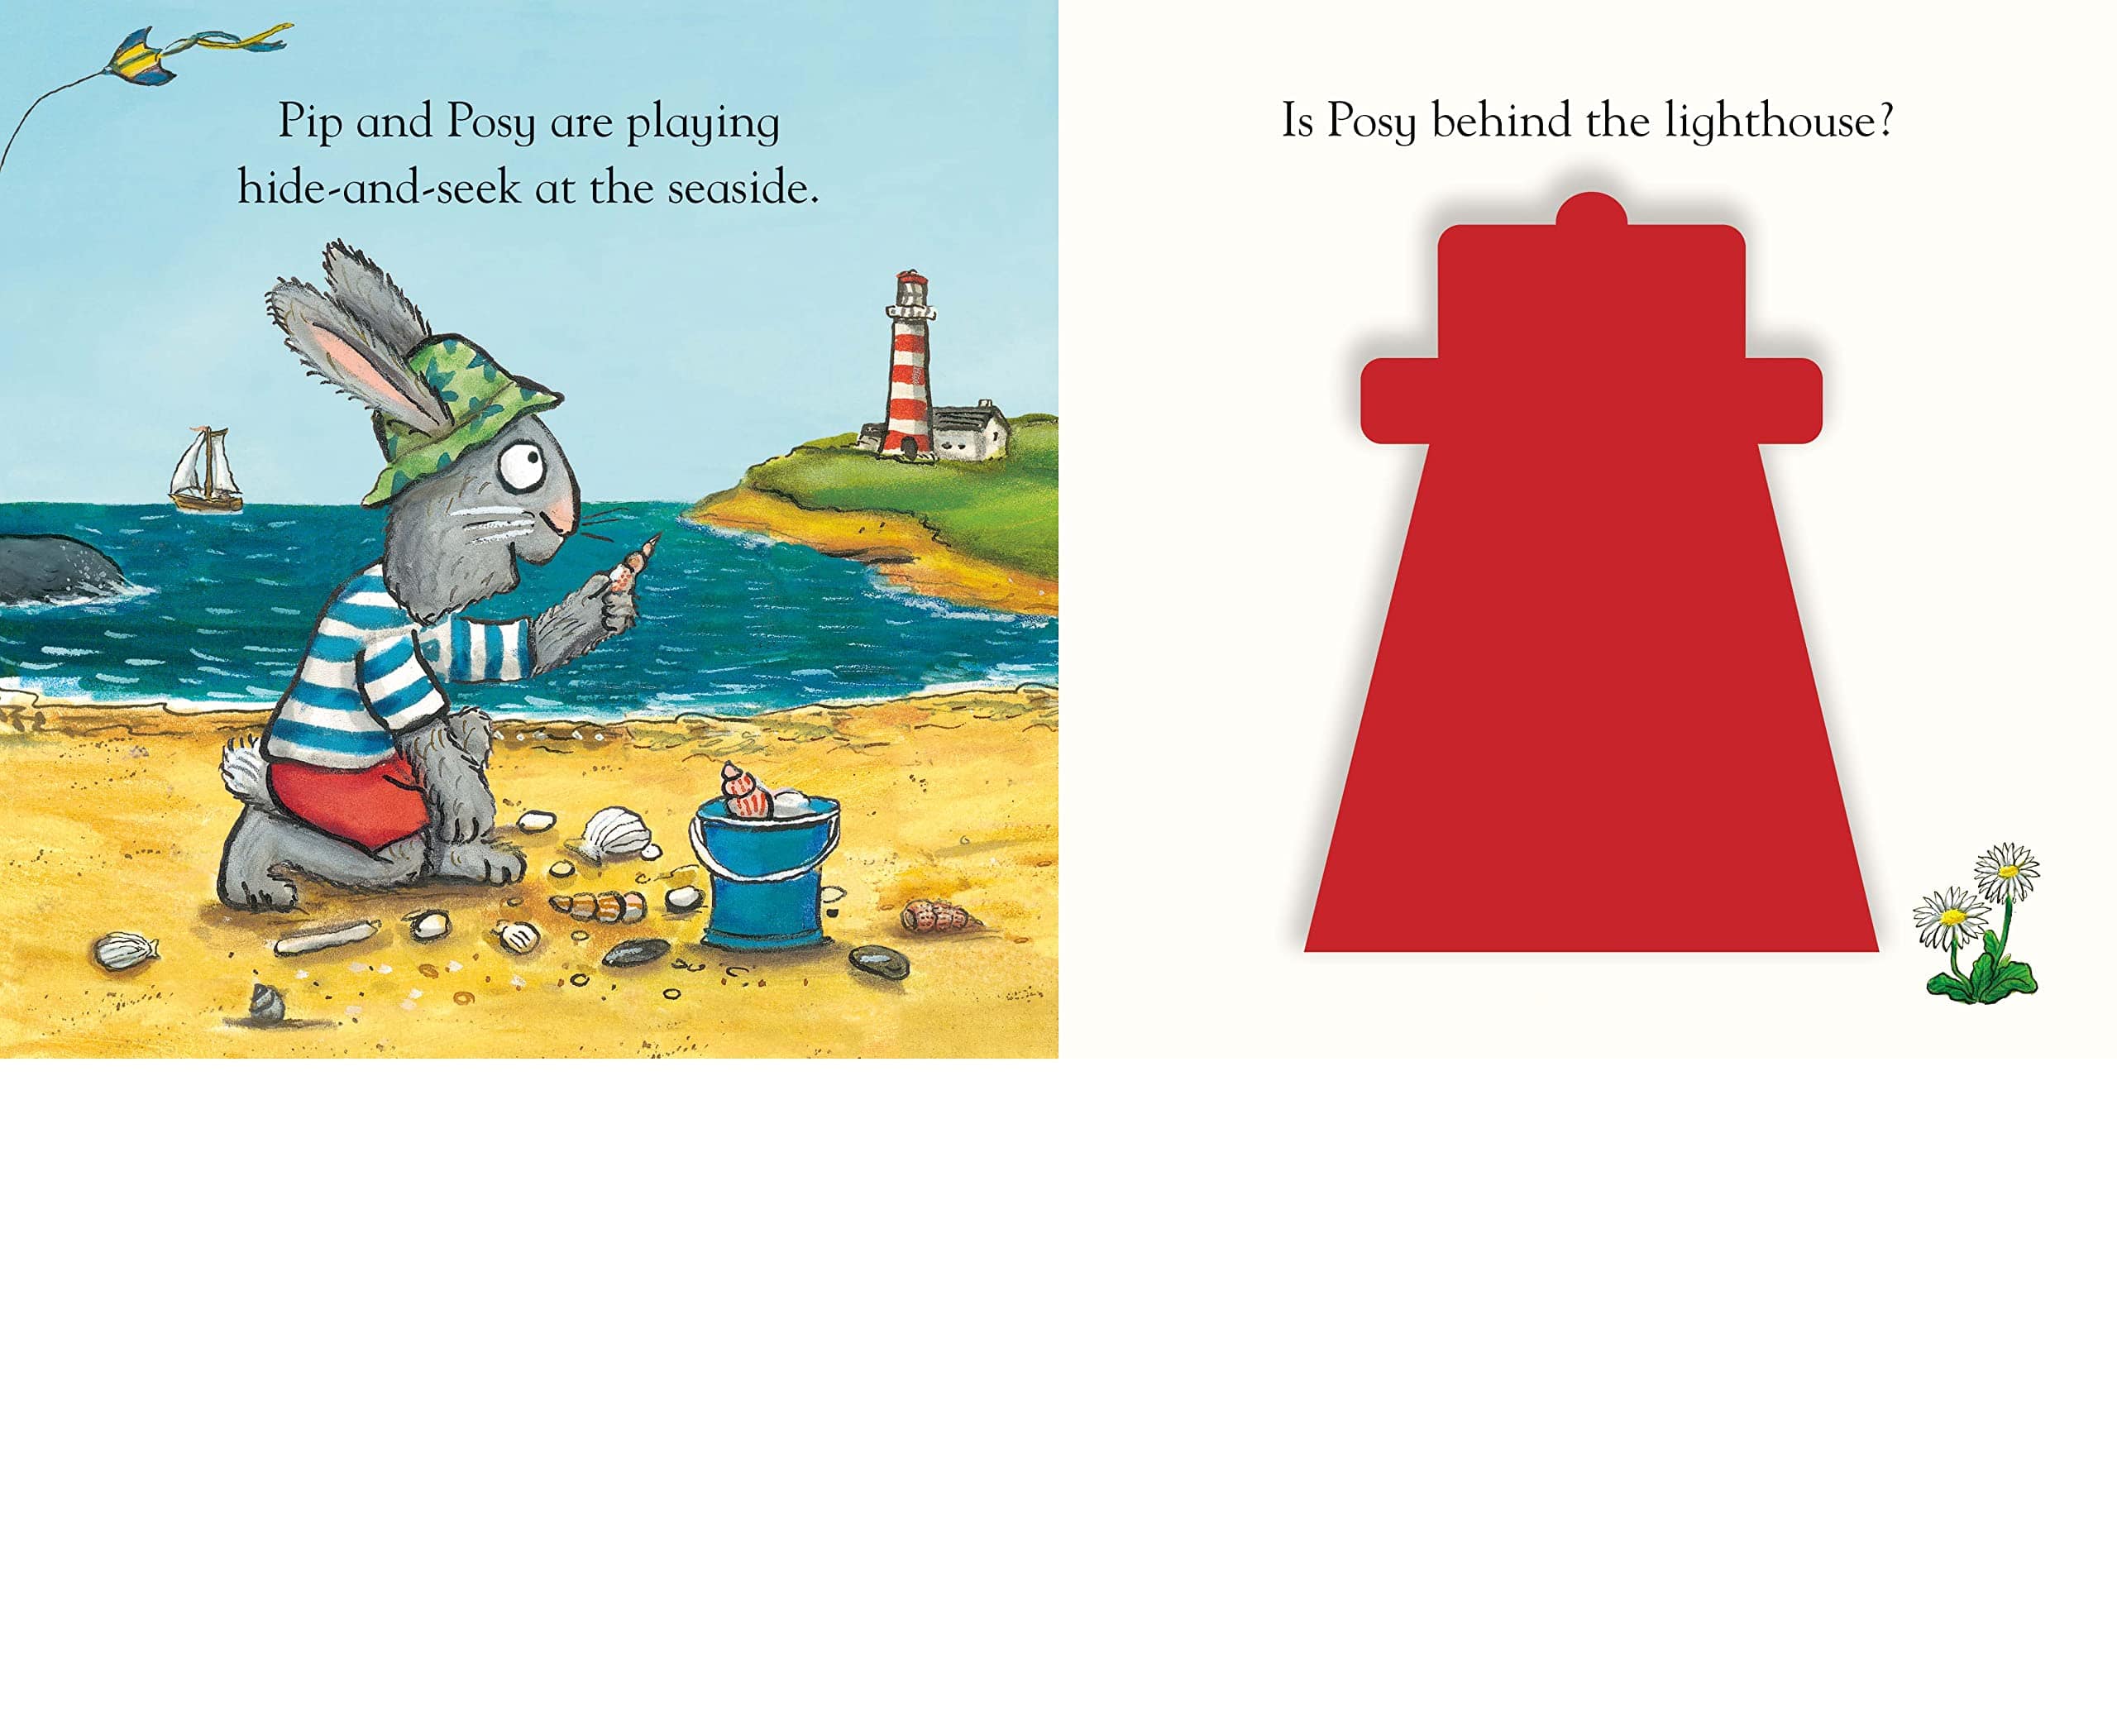 Pip and Posy, Where Are You? At the Seaside (A Felt Flaps Book)